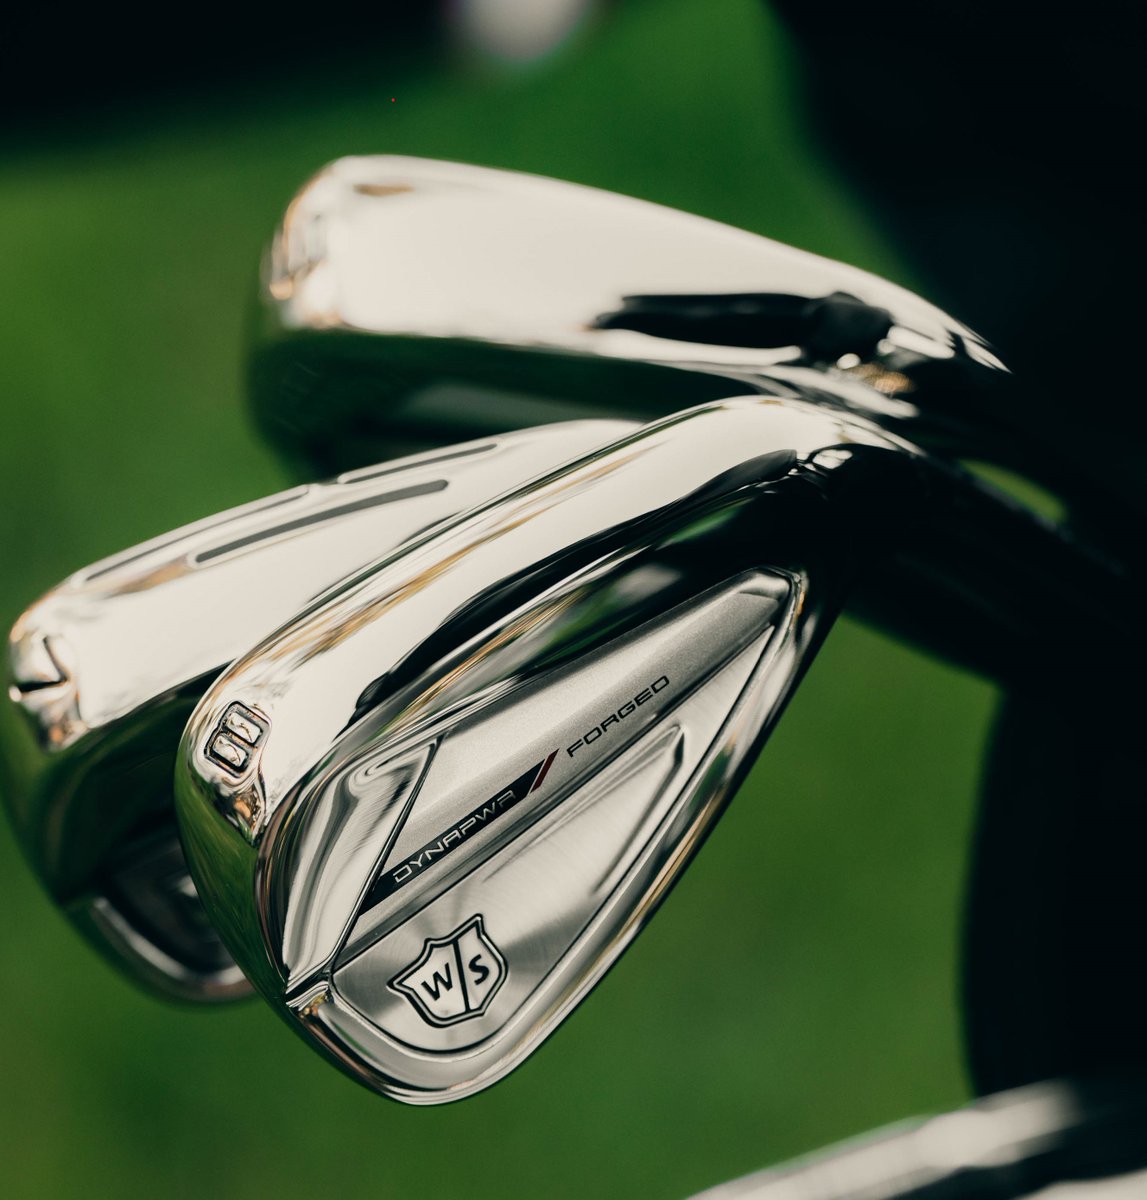 Don't take my word, see what @MyGolfSpy said: Seriously, these irons will make you rethink every decision you’ve ever made and regret every conclusion you’ve ever jumped to - If our relationship means anything at all to you, give these things a whack. Well said ...@WilsonGolf